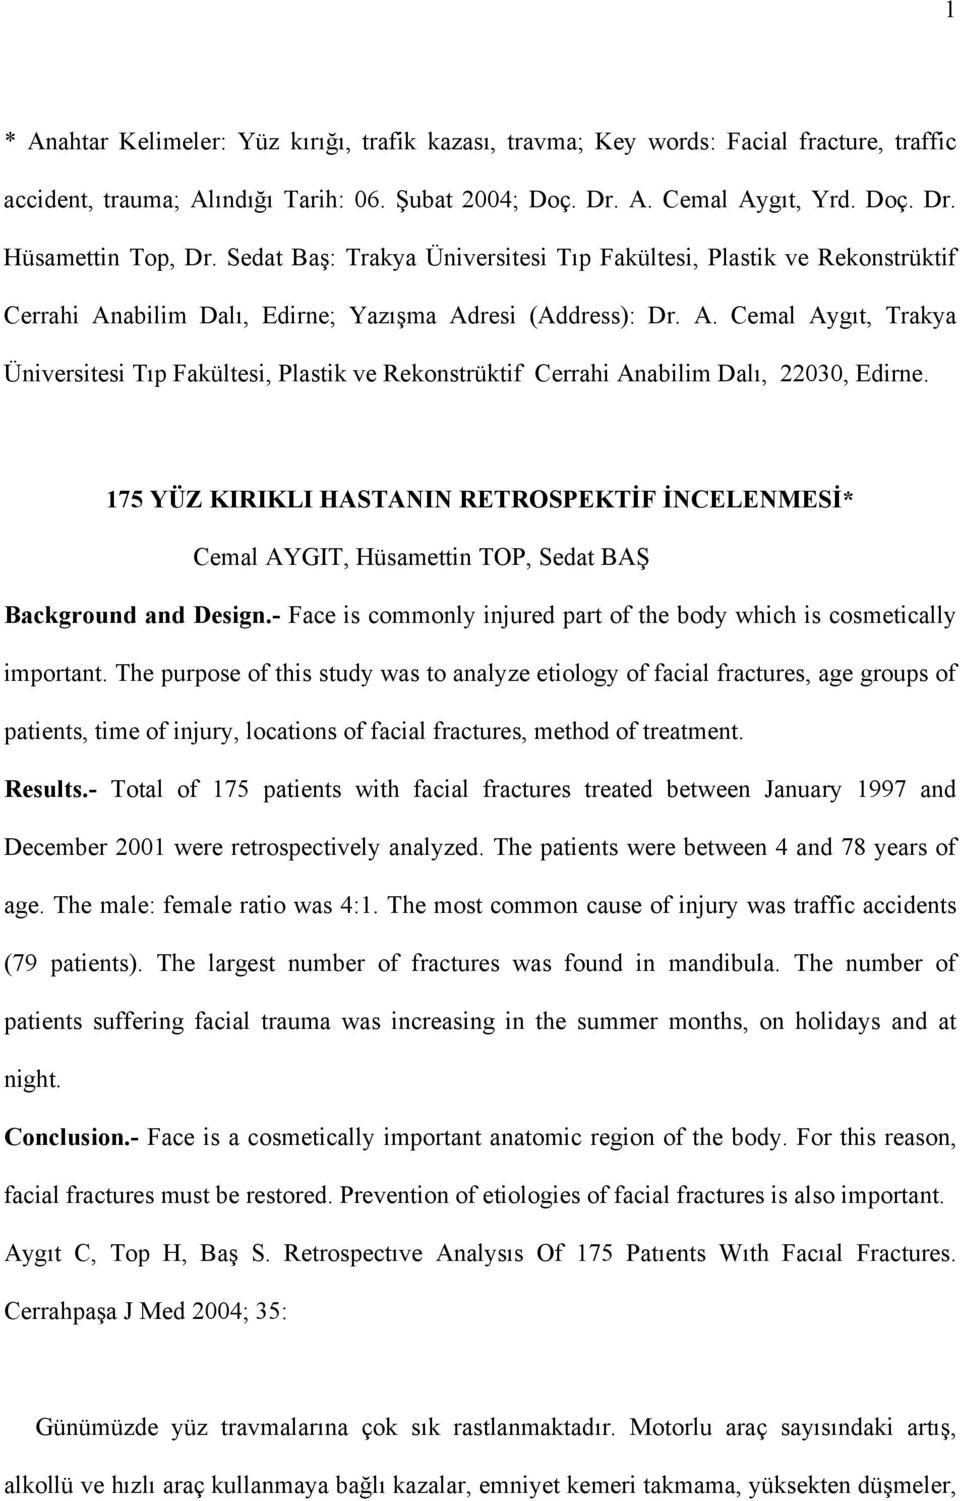 175 YÜZ KIRIKLI HASTANIN RETROSPEKTİF İNCELENMESİ* Cemal AYGIT, Hüsamettin TOP, Sedat BAŞ Background and Design.- Face is commonly injured part of the body which is cosmetically important.